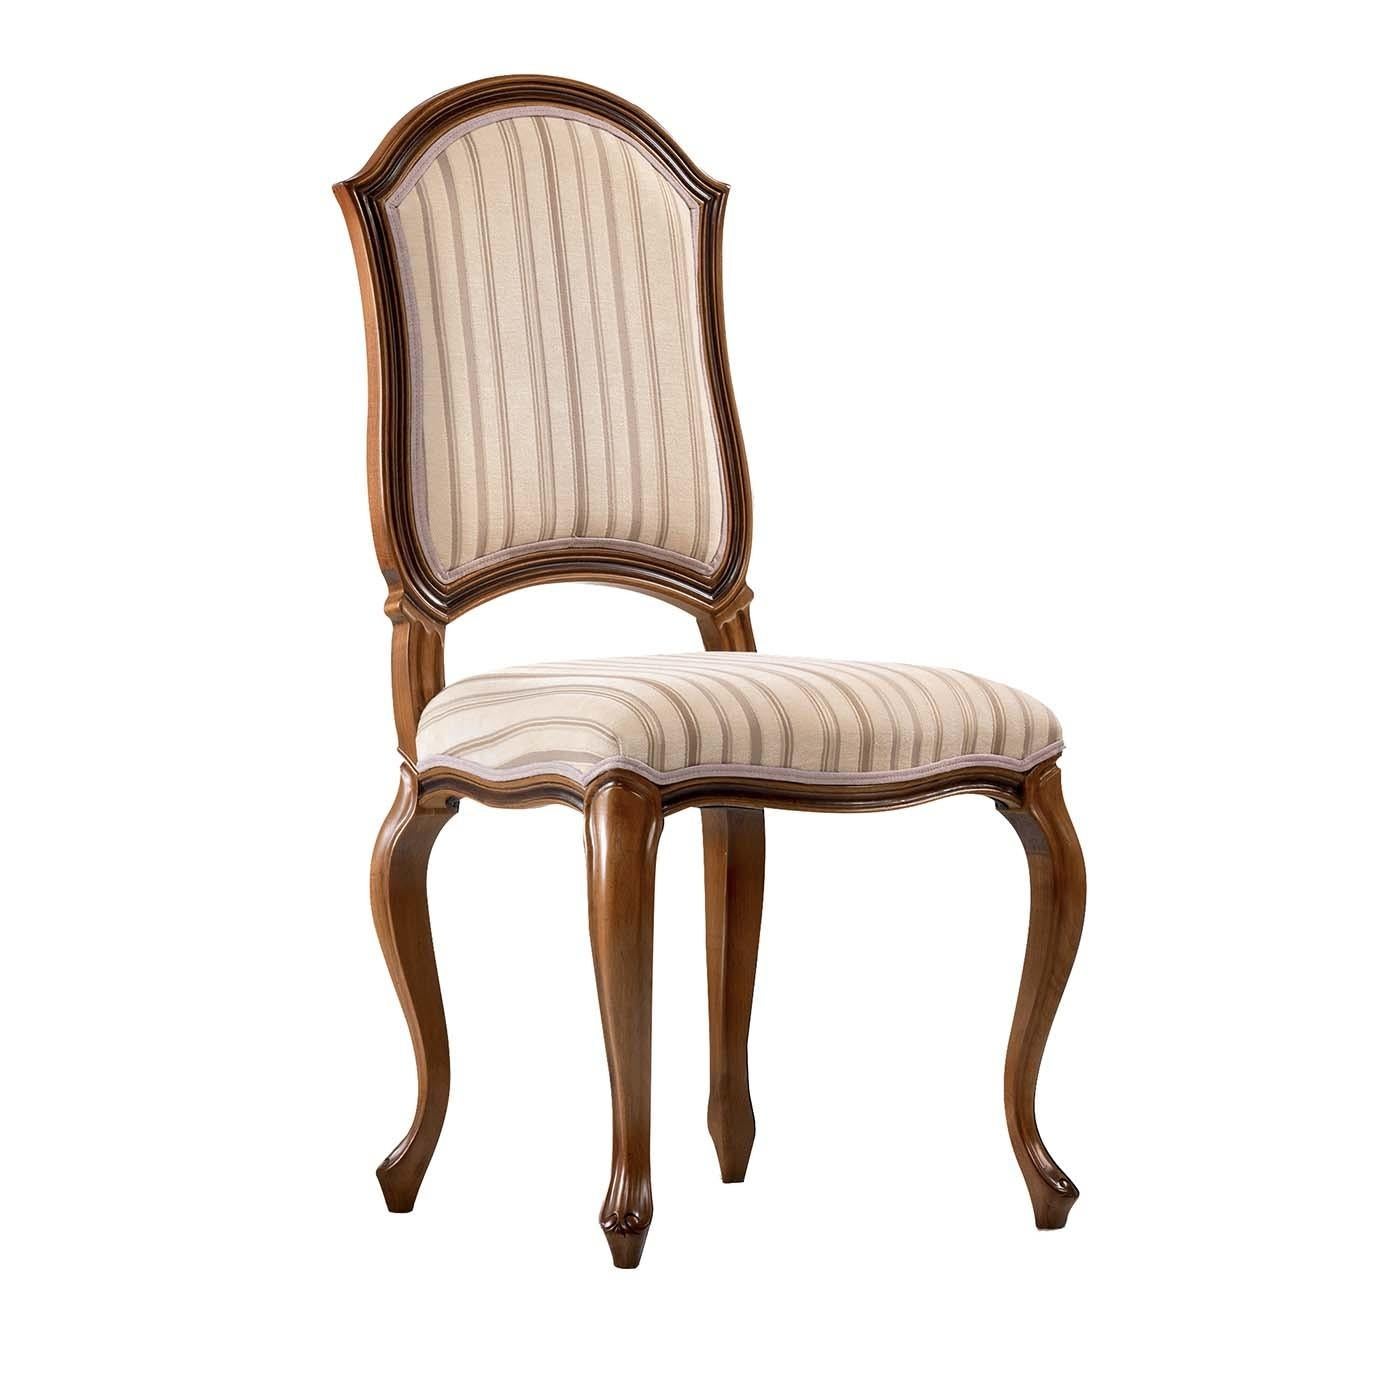 Italian Contemporary Wooden Dining Chair with Striped Fabric